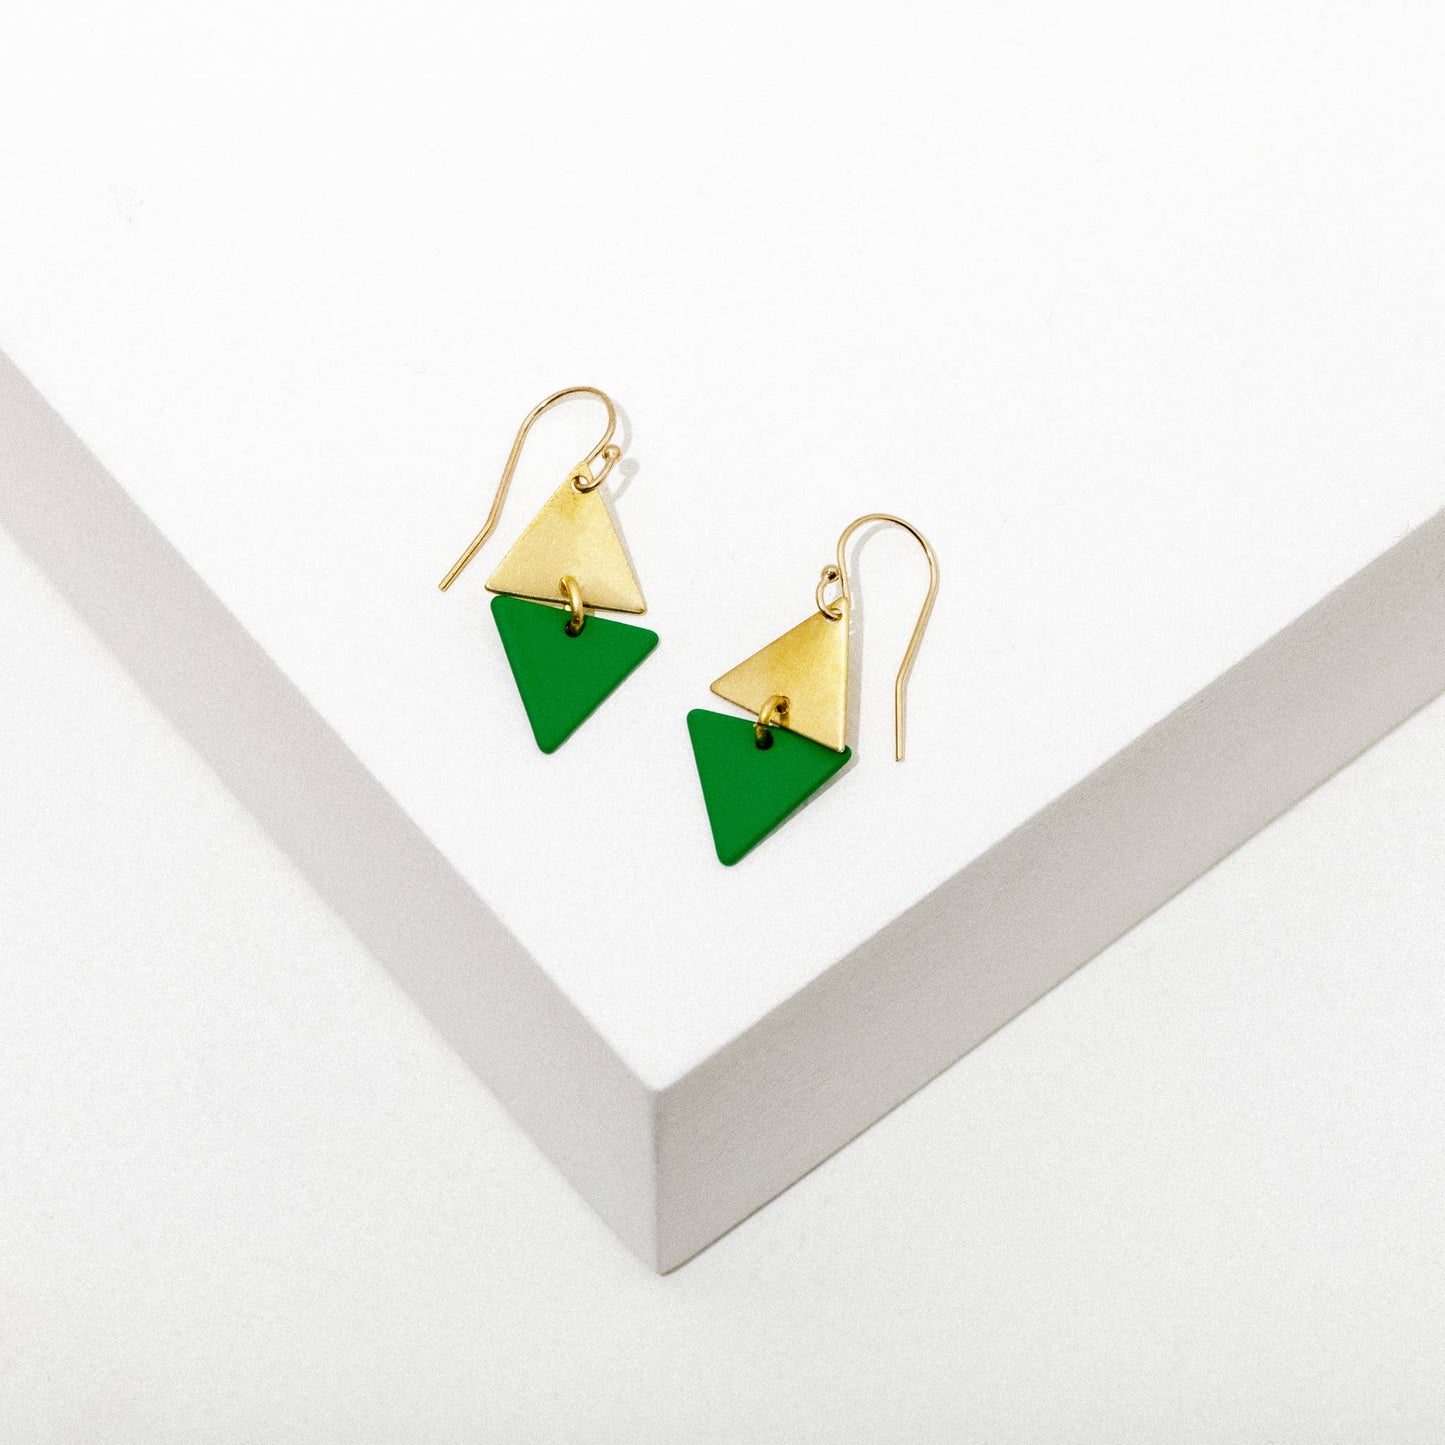 Larissa Loden - Alta Earrings  Larissa Loden Green  -better made easy-eco-friendly-sustainable-gifting